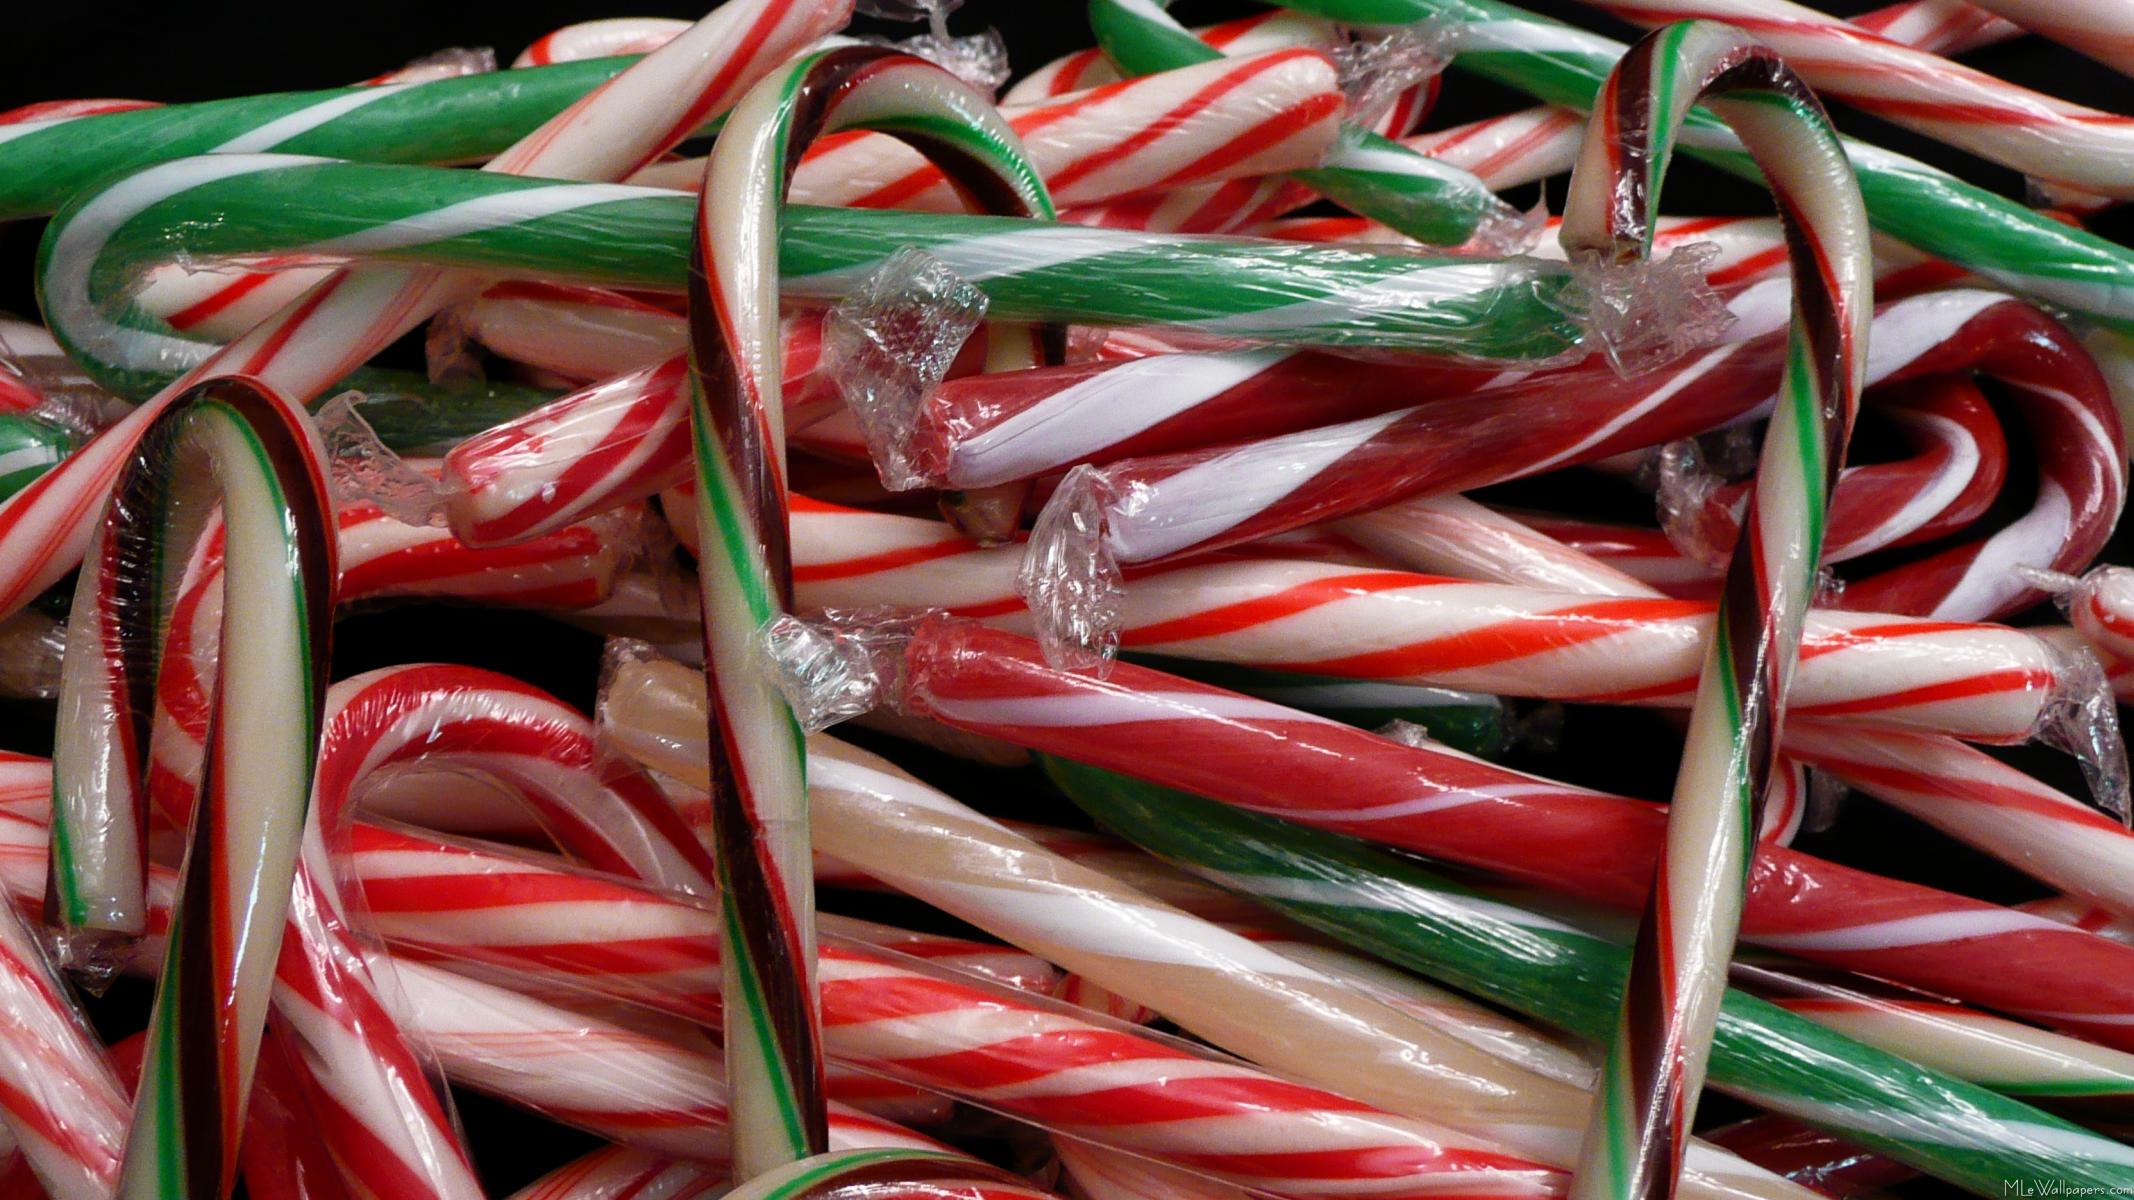 MLeWallpapers.com - Chocolate Mint Candy Canes